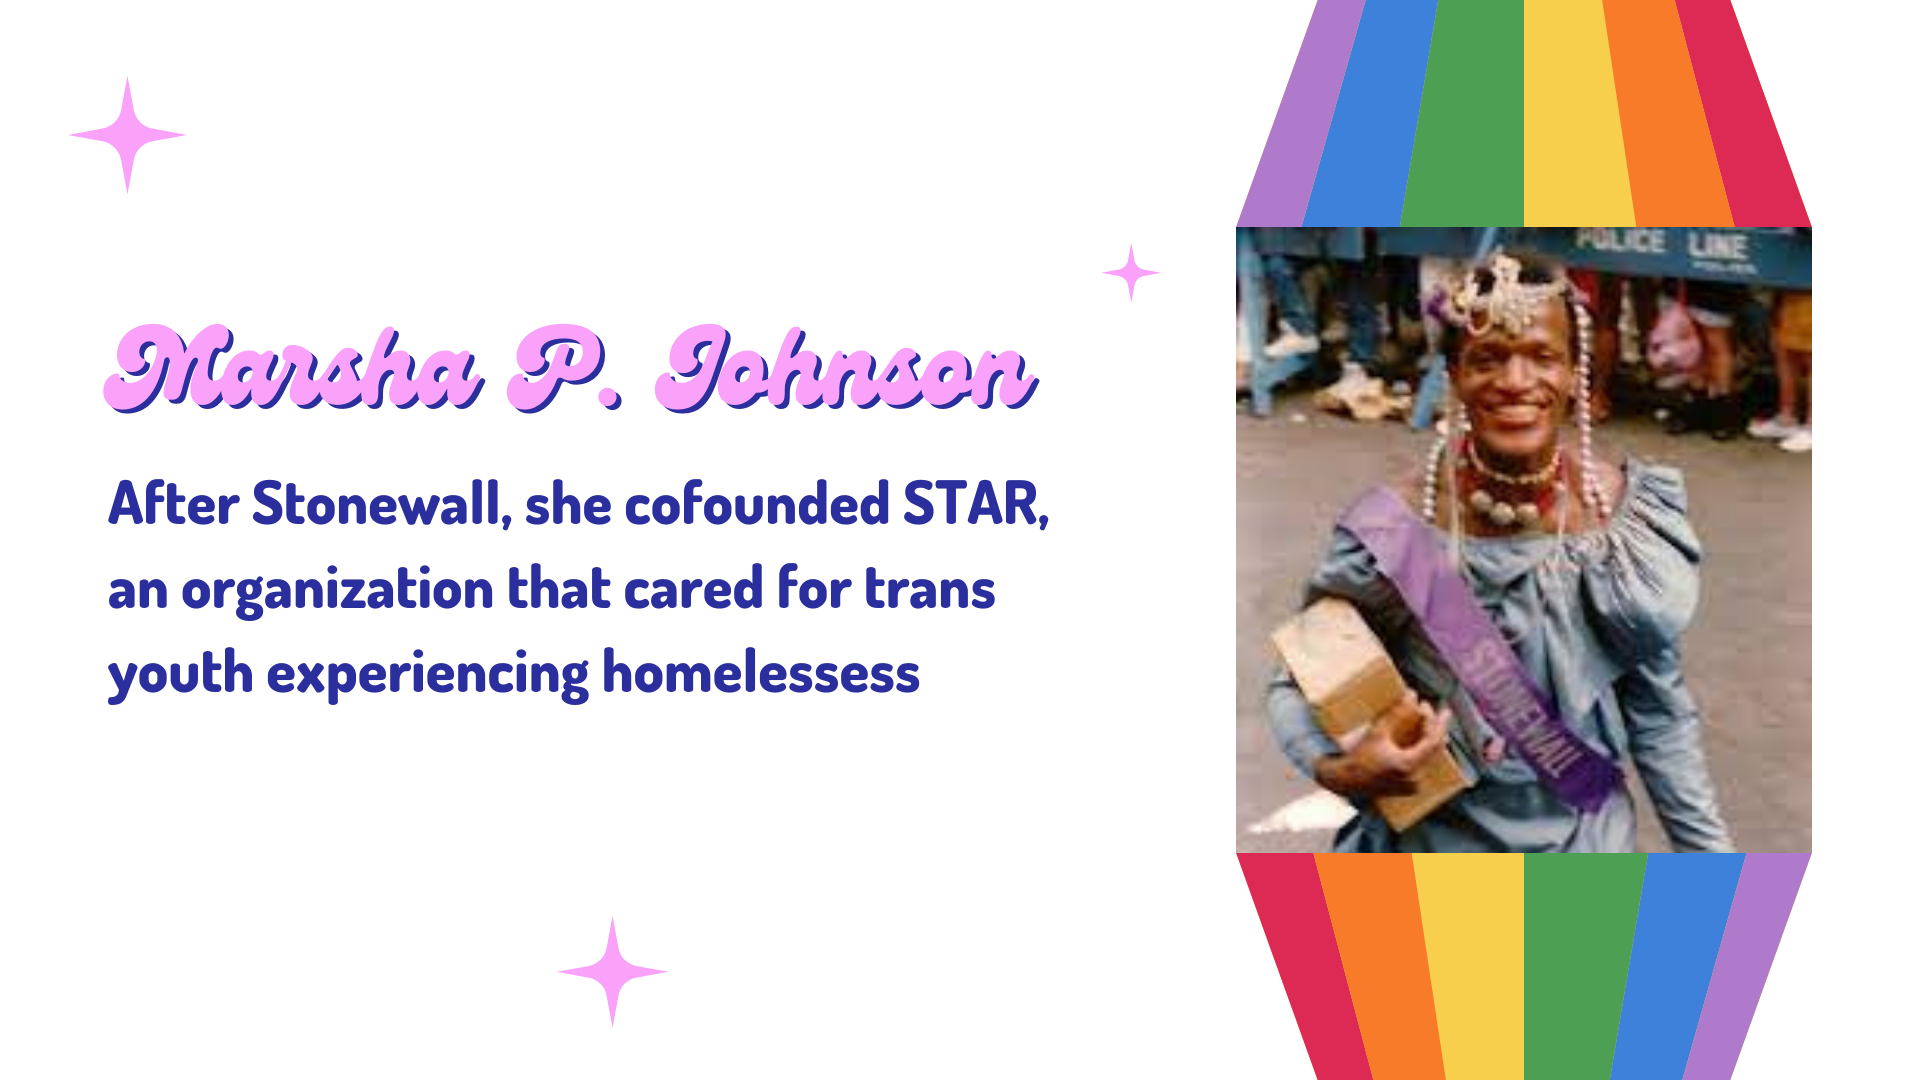 Image of Black woman wearing Stonewall sash and blue dress, rainbow graphics and text saying "Marsha P. Johnson, After Stonewall, she cofounded STAR, an organization that cared for trans youth experiencing homelessess"